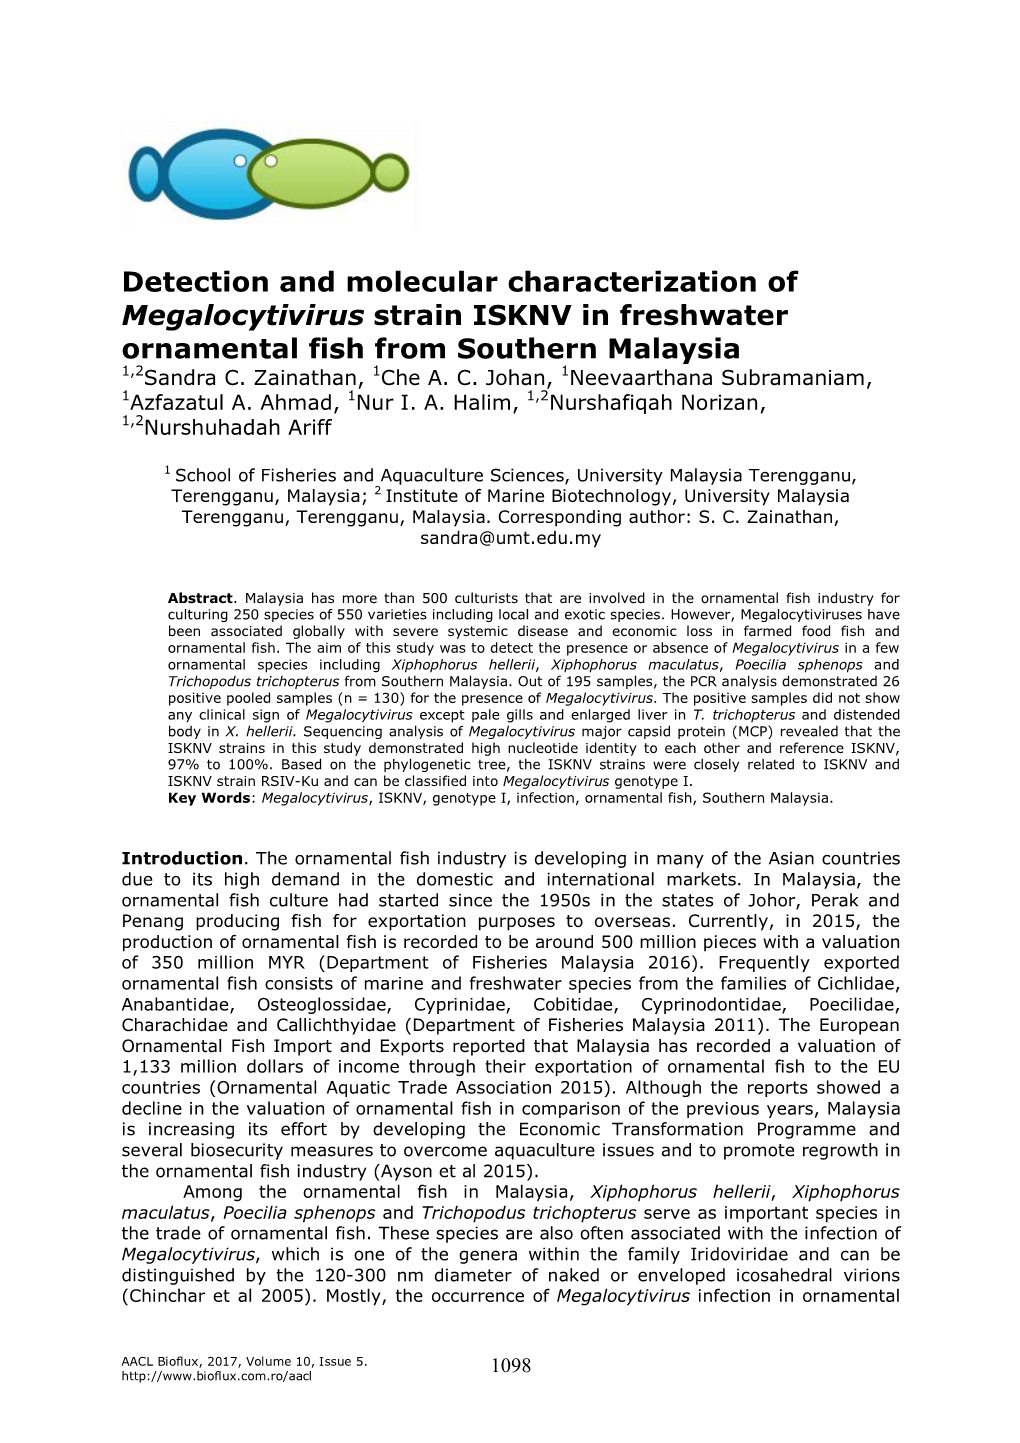 Detection and Molecular Characterization of Megalocytivirus Strain ISKNV in Freshwater Ornamental Fish from Southern Malaysia 1,2Sandra C